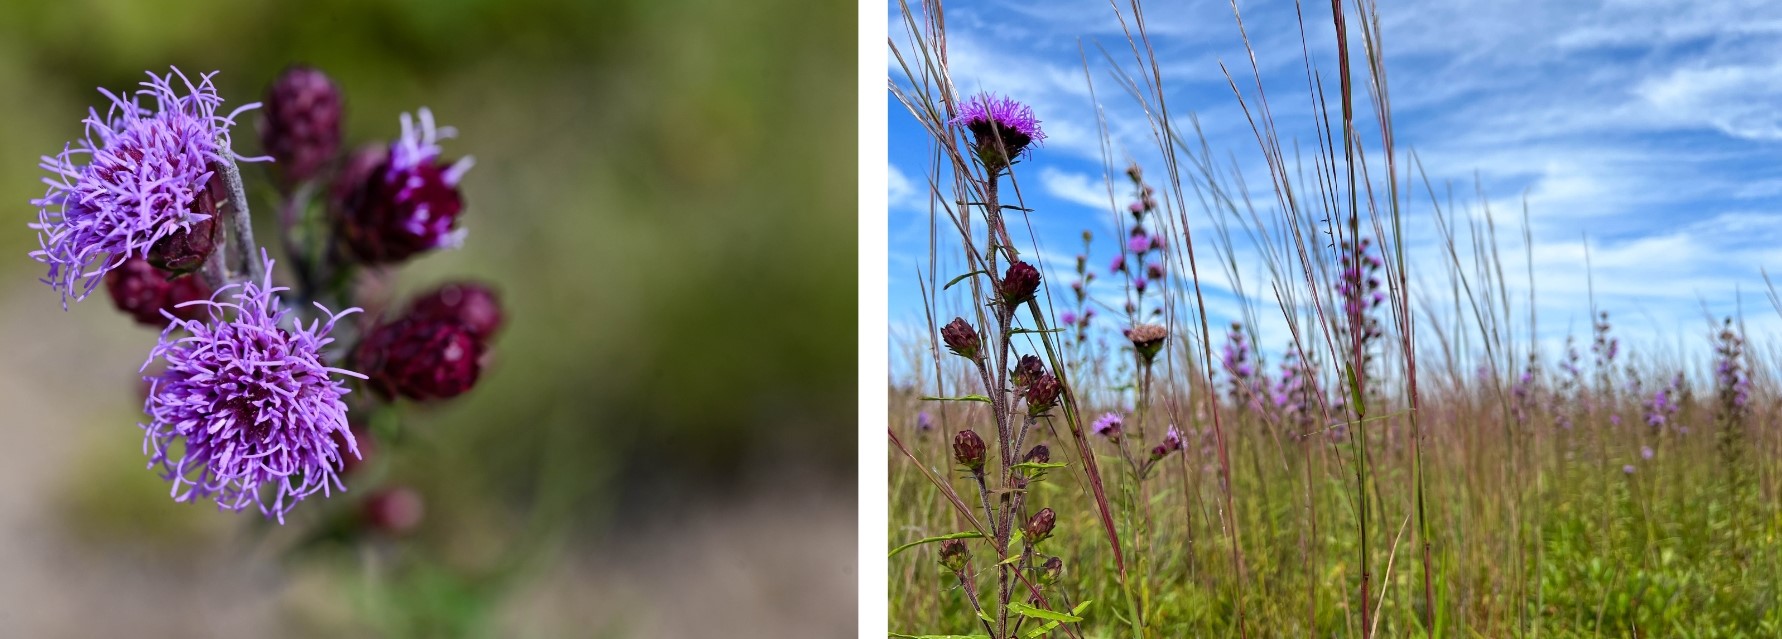 A close view of the purple flowers on a northern blazing star plant, and a photo of plants with purple flowers mixed among tall grass.